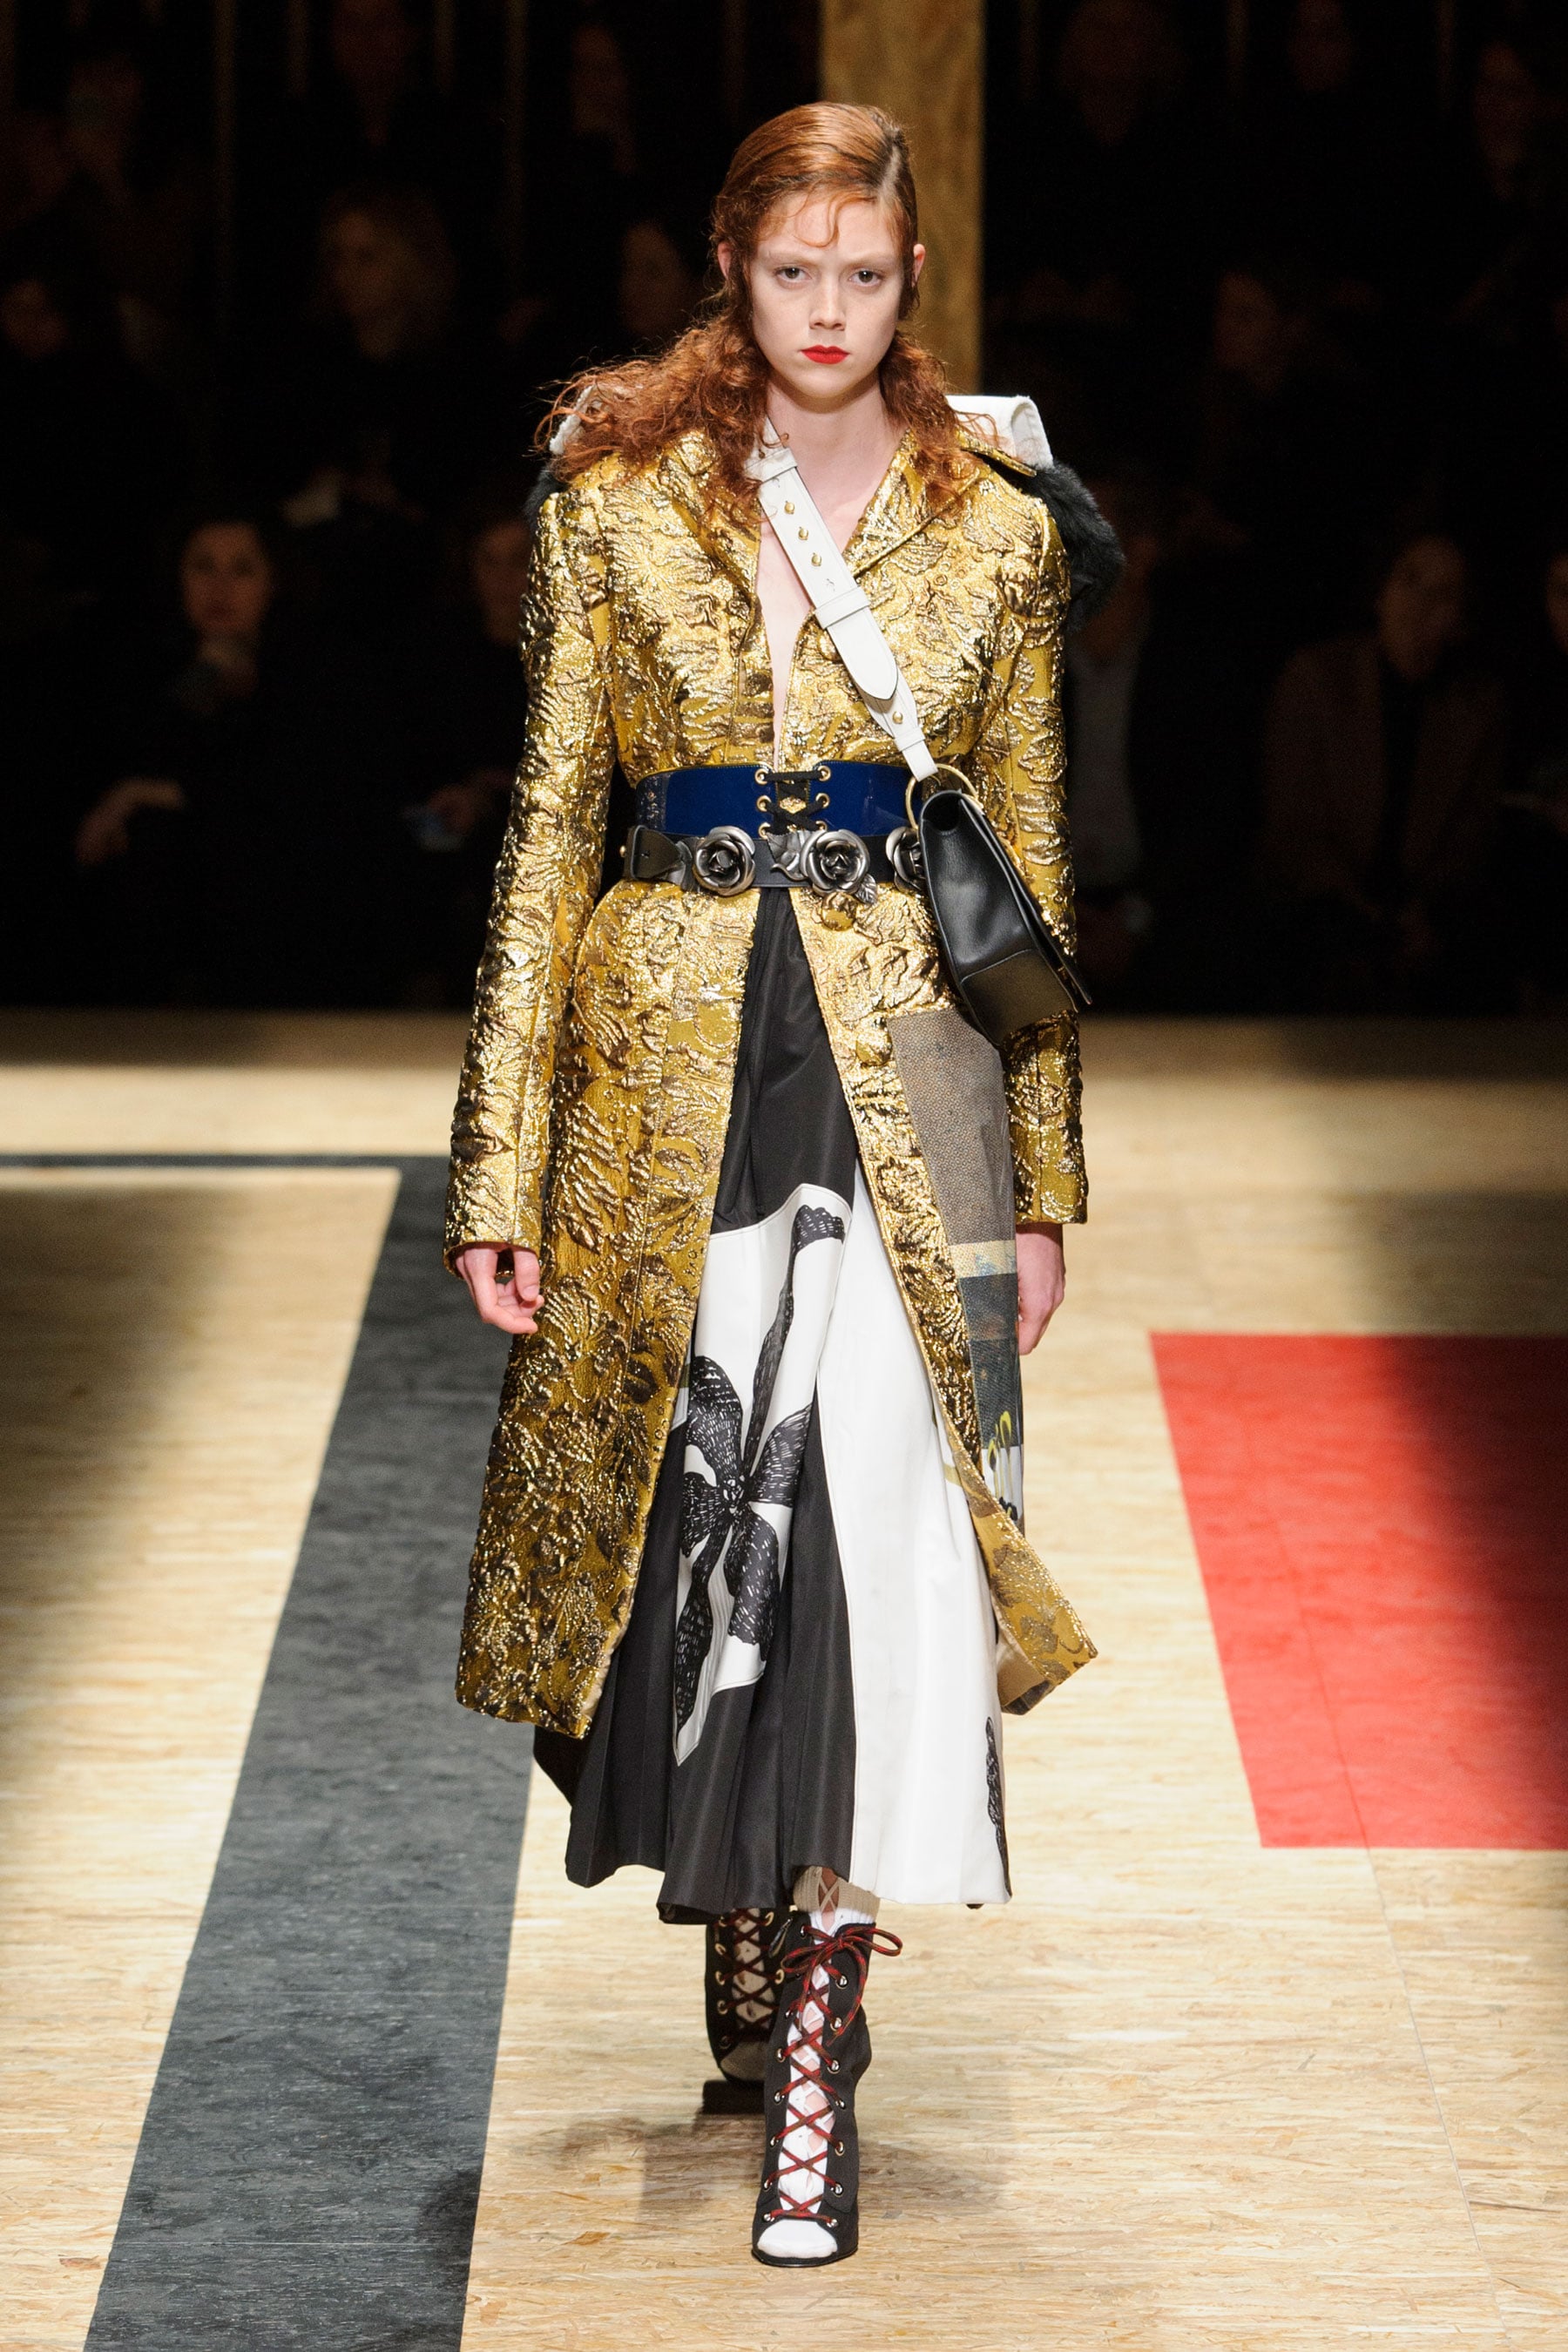 Fashion, Shopping & Style | Prada Crafts a Collection For the Woman Who  Does It All | POPSUGAR Fashion Photo 54